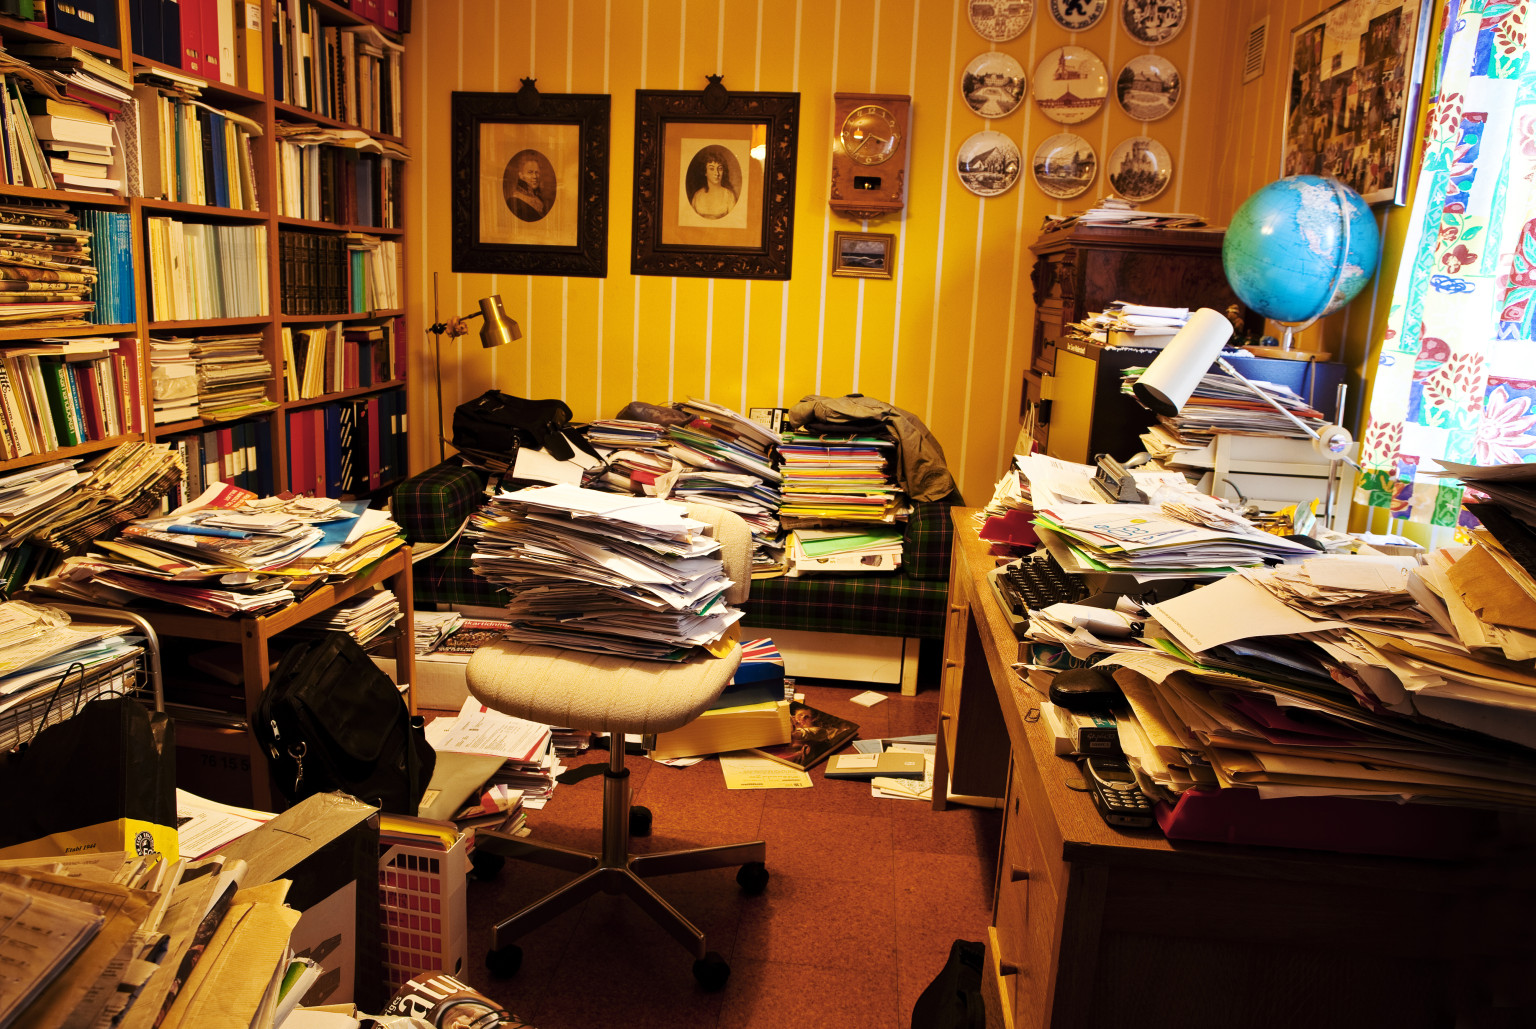 Messy Work Spaces Spur Creativity, While Tidy Environments ...
